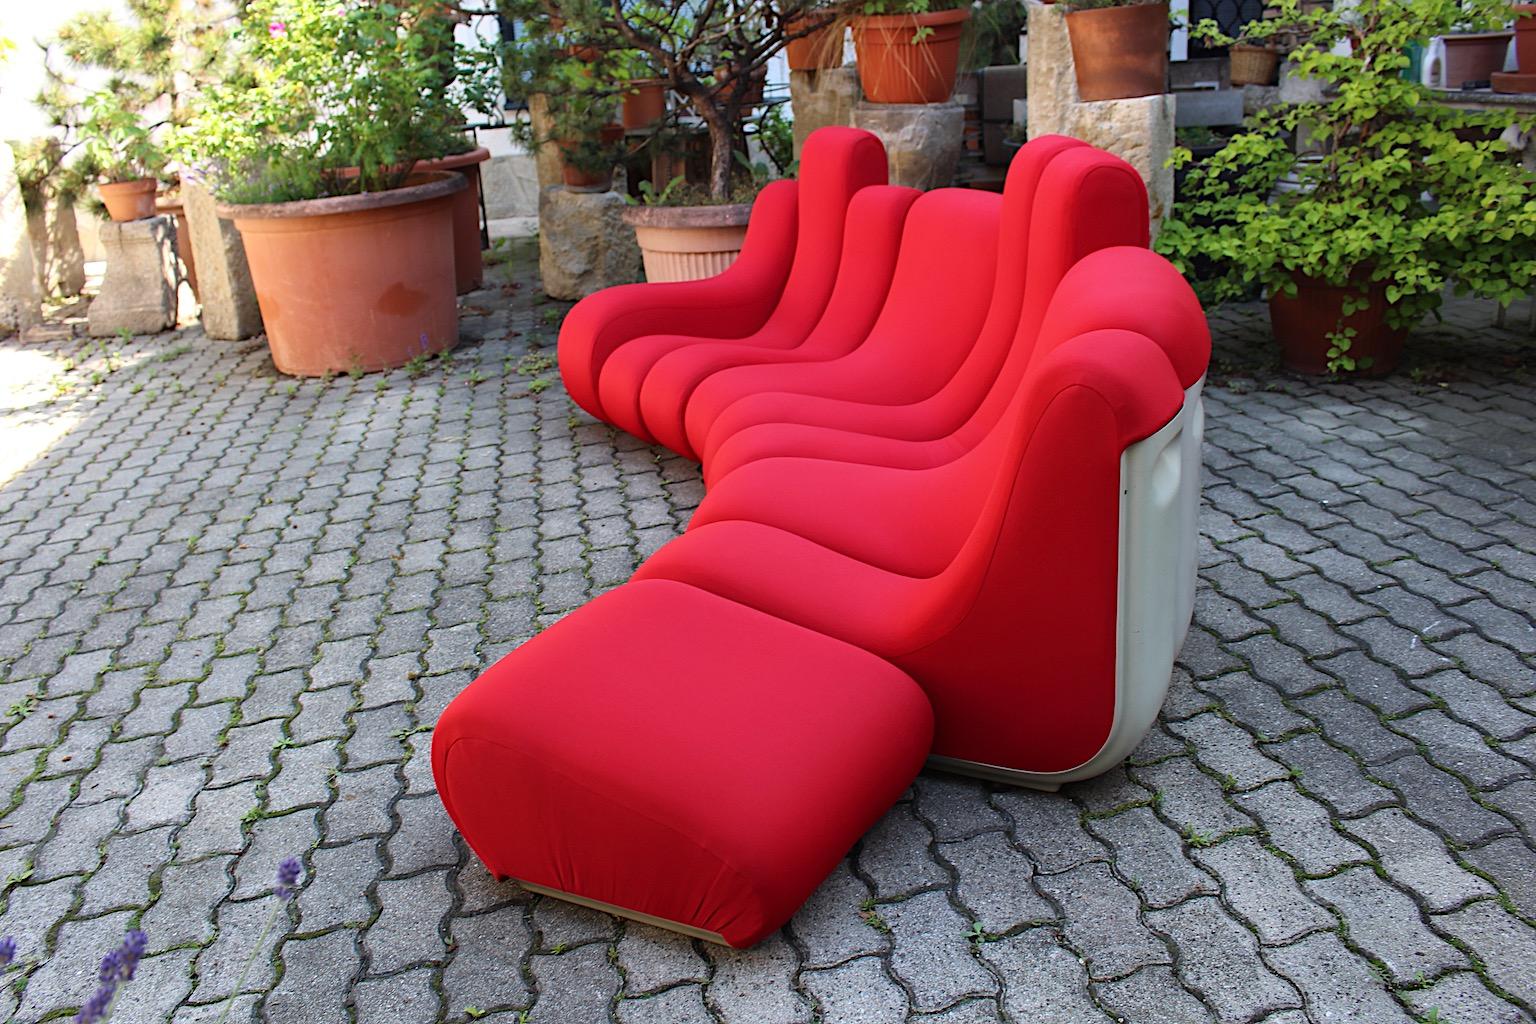 Space Age Vintage Red Sectional Freestanding Sofa Vario Pillo Burghardt Vogtherr For Sale 6